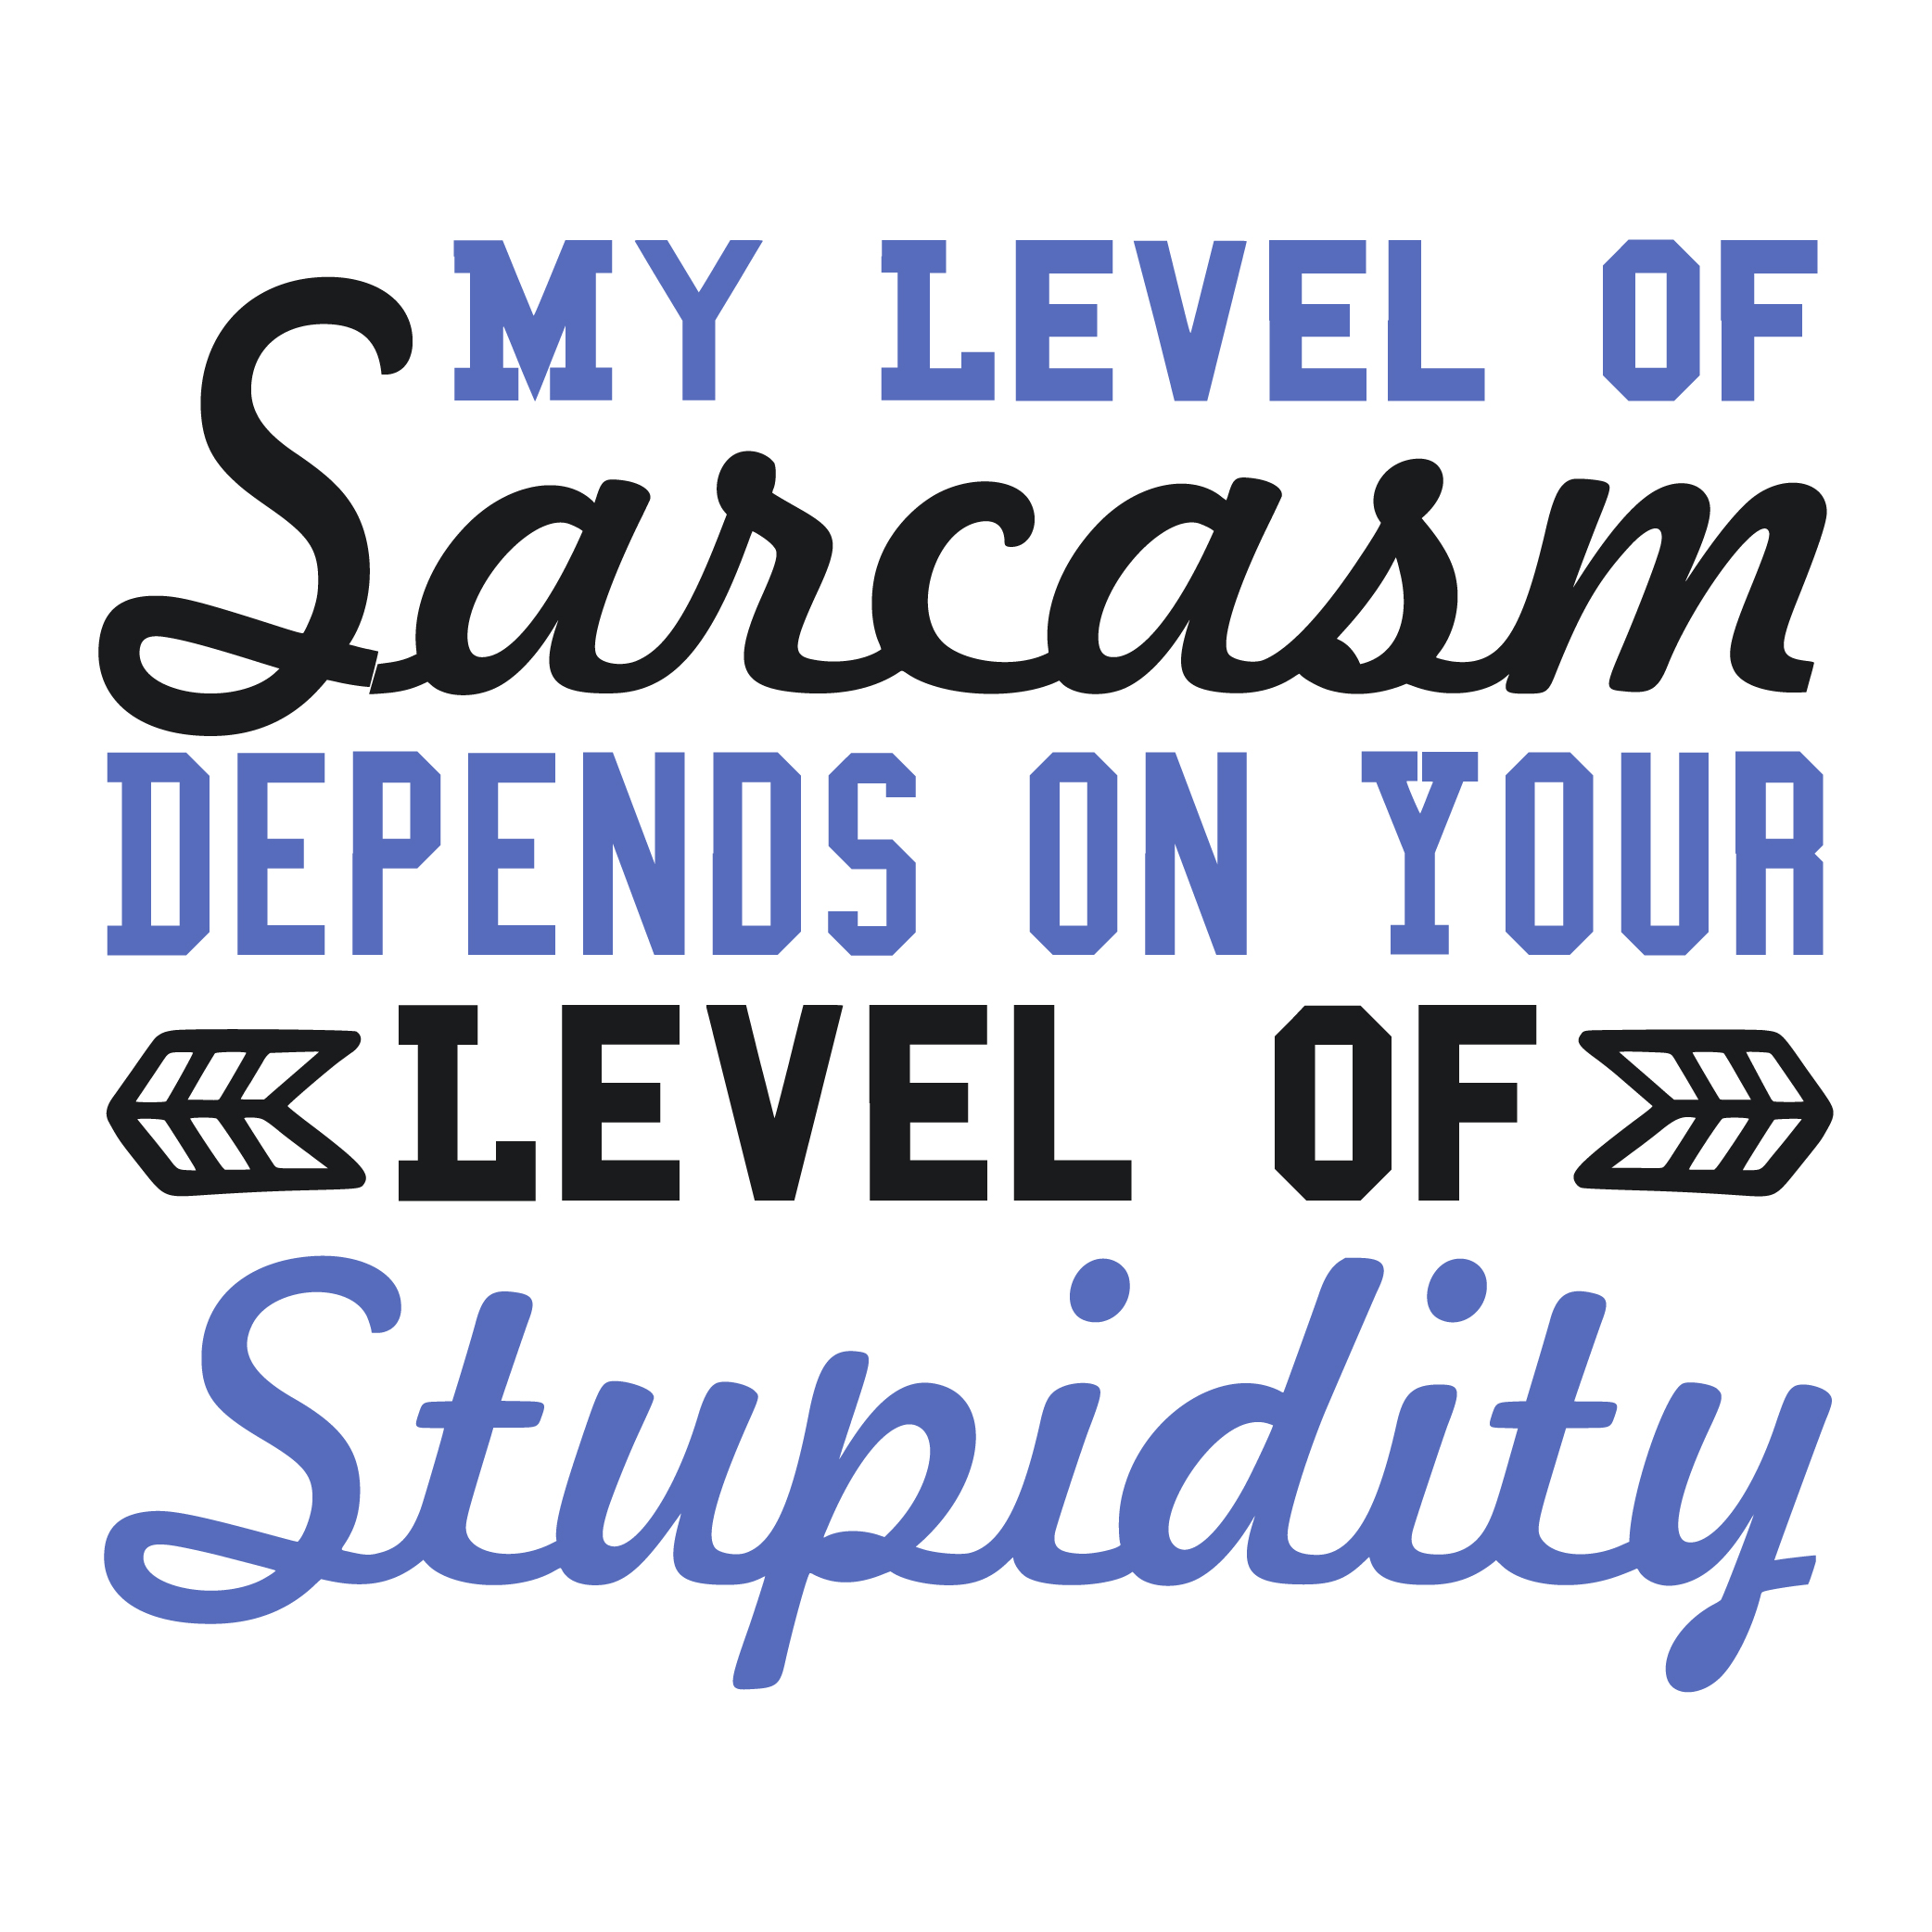 my level of sarcasm depends on your level of stupidity woman SVG Boss Lady  Black Lives Matter  Lady Woman Diva Tshirt Cut File Cricut Silhouette Women Empowerment svg Feminism svg Girl Power 